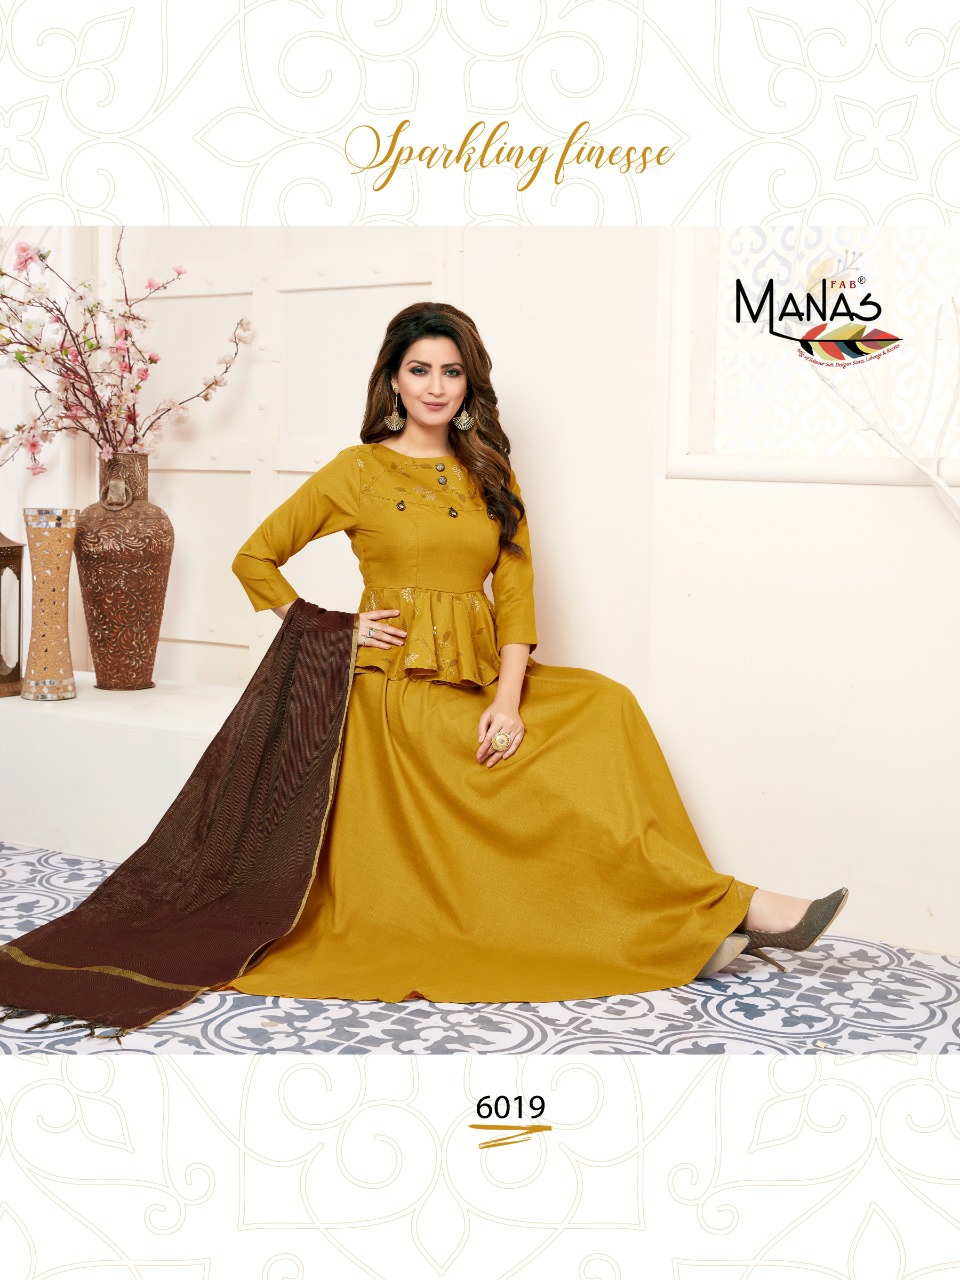 Manas Presents Kaira Vol-3 Beautiful Designer Gown Style Kurtis With Dupatta Collection At Wholesale